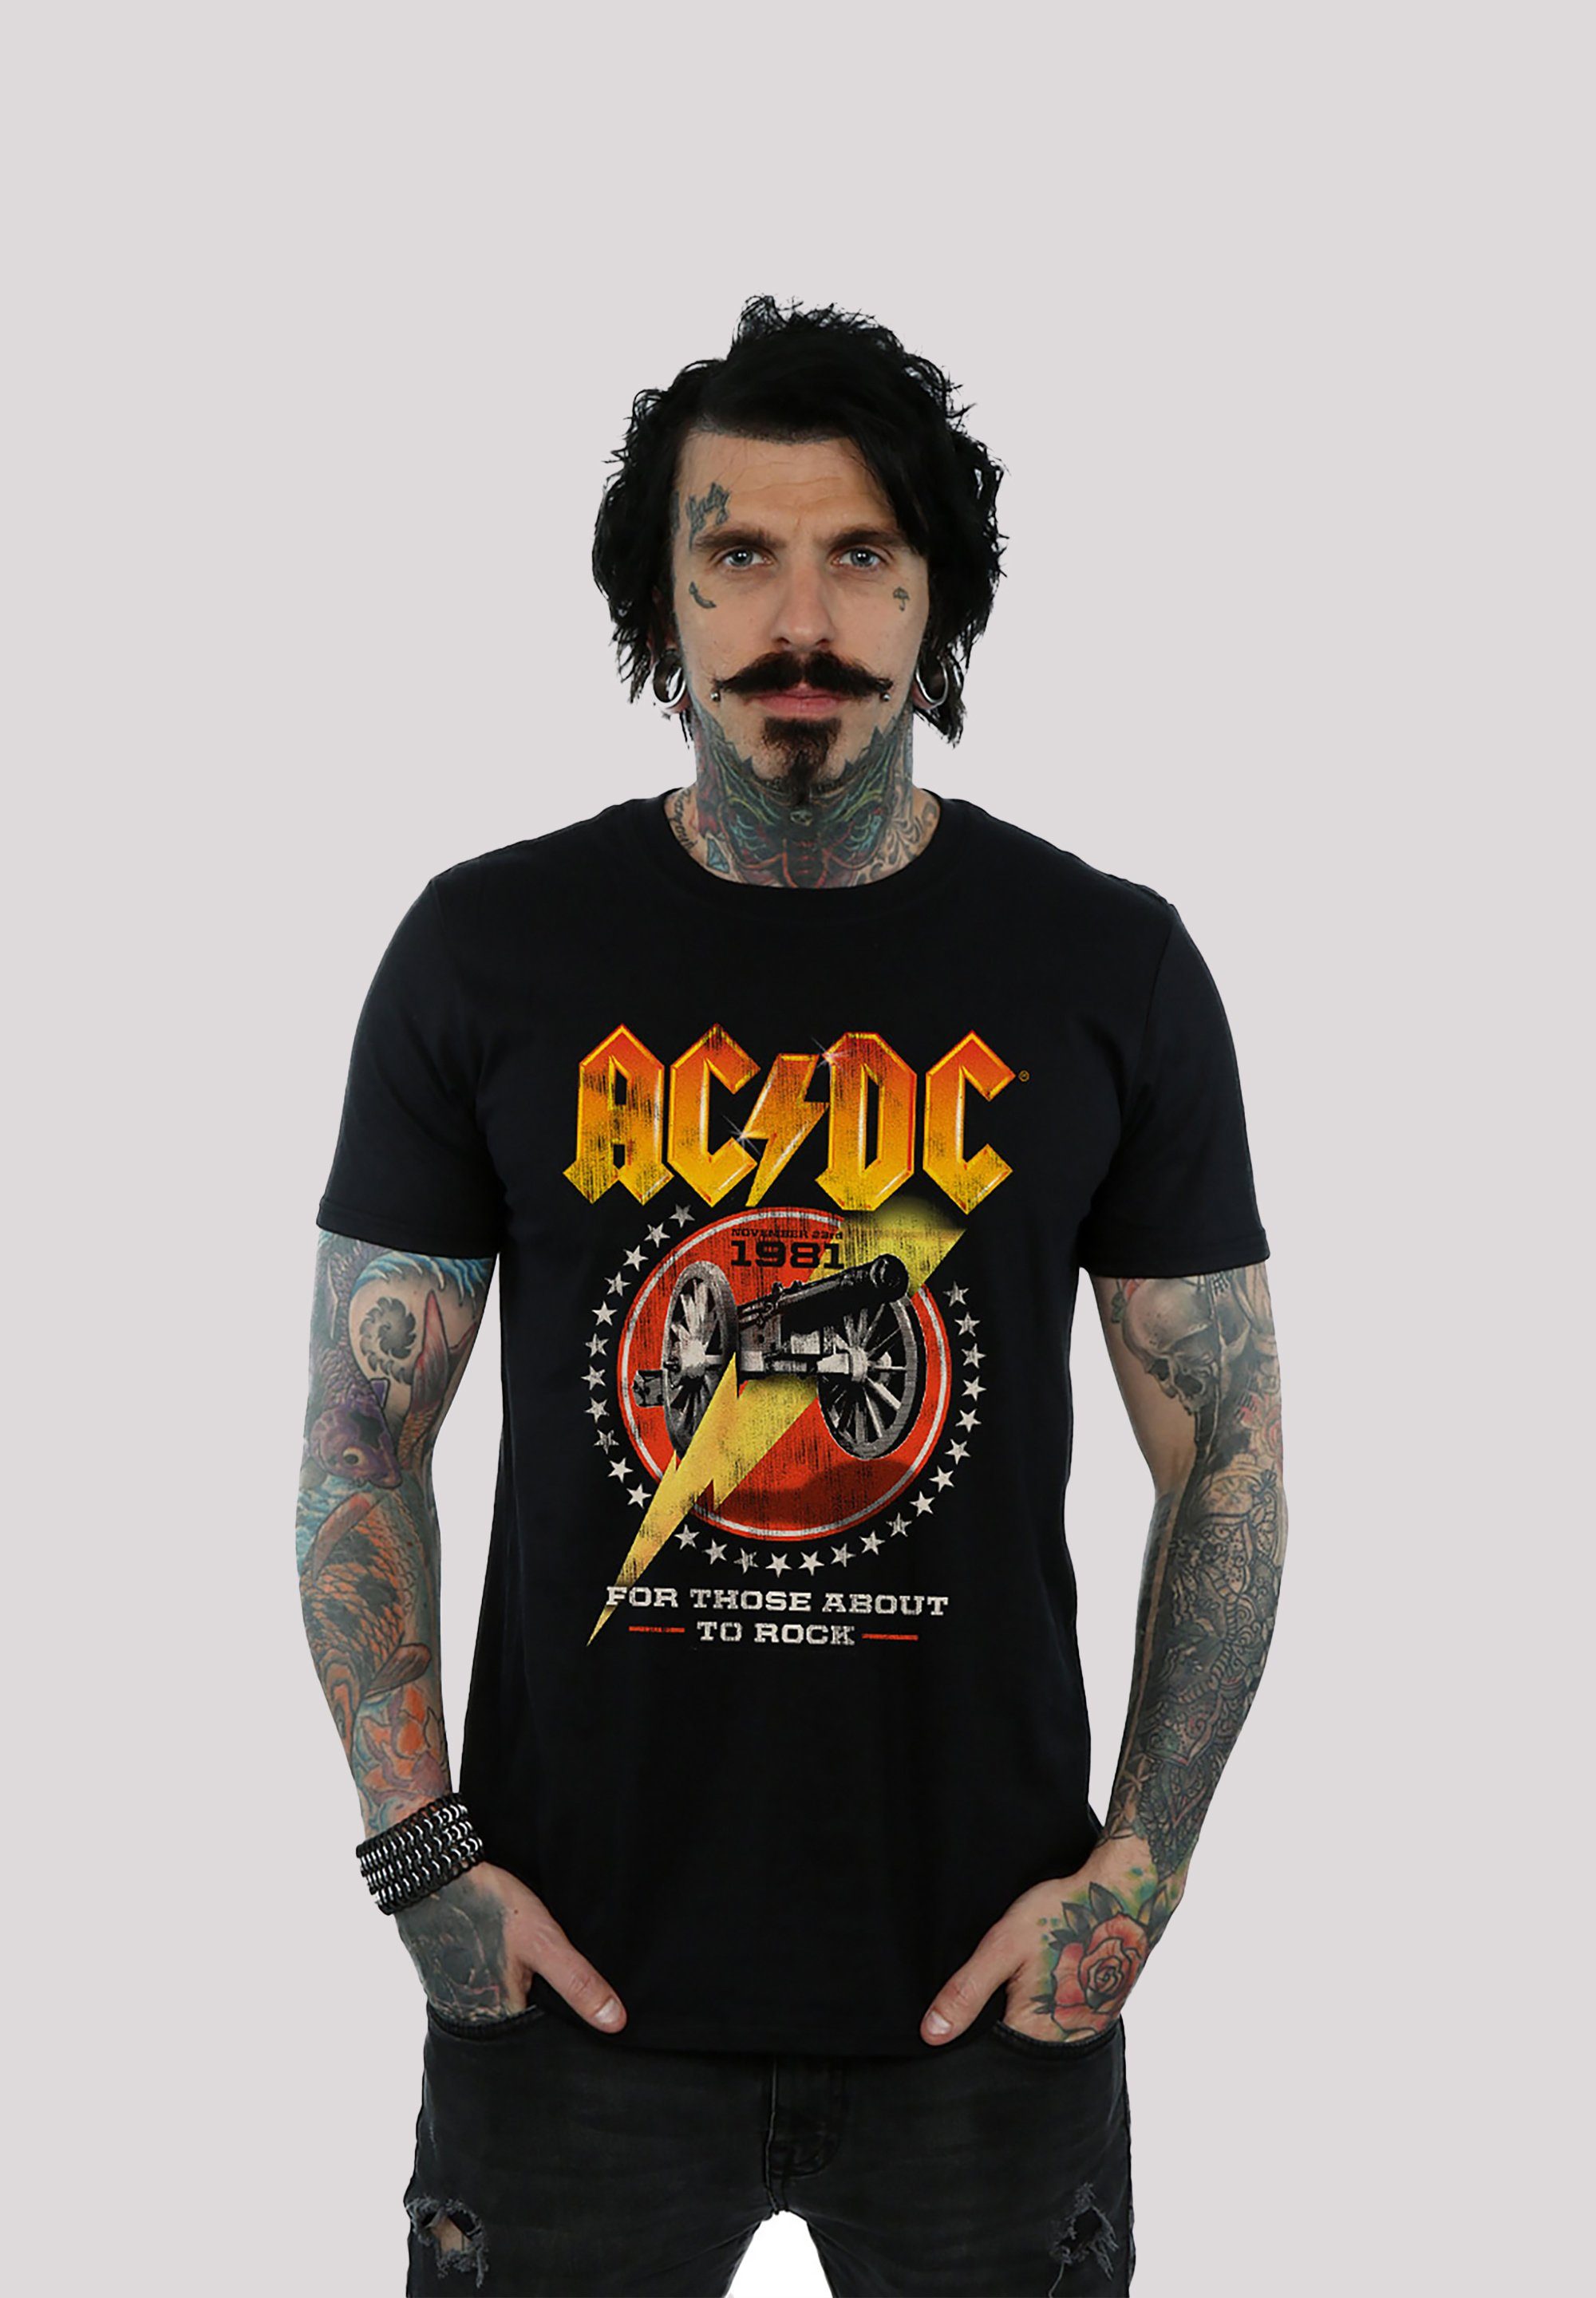 1981 T-Shirt F4NT4STIC Kinder & About für Rock To Herren For ACDC Those Print